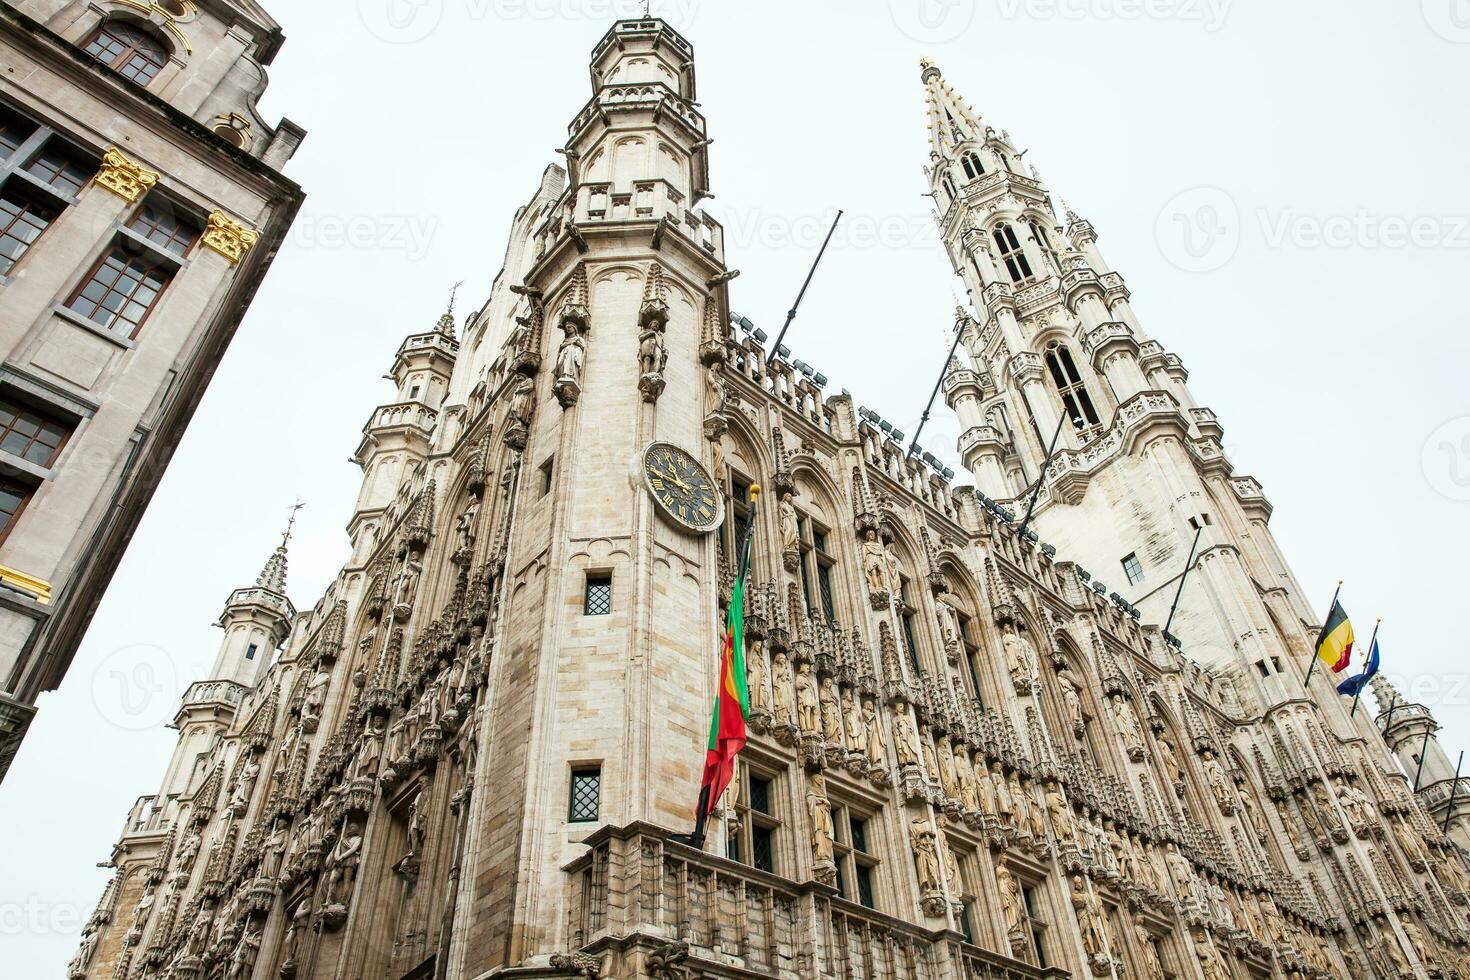 Facade of the historic Brussels town hall building located on the famous Grand Place built in the 15th century photo